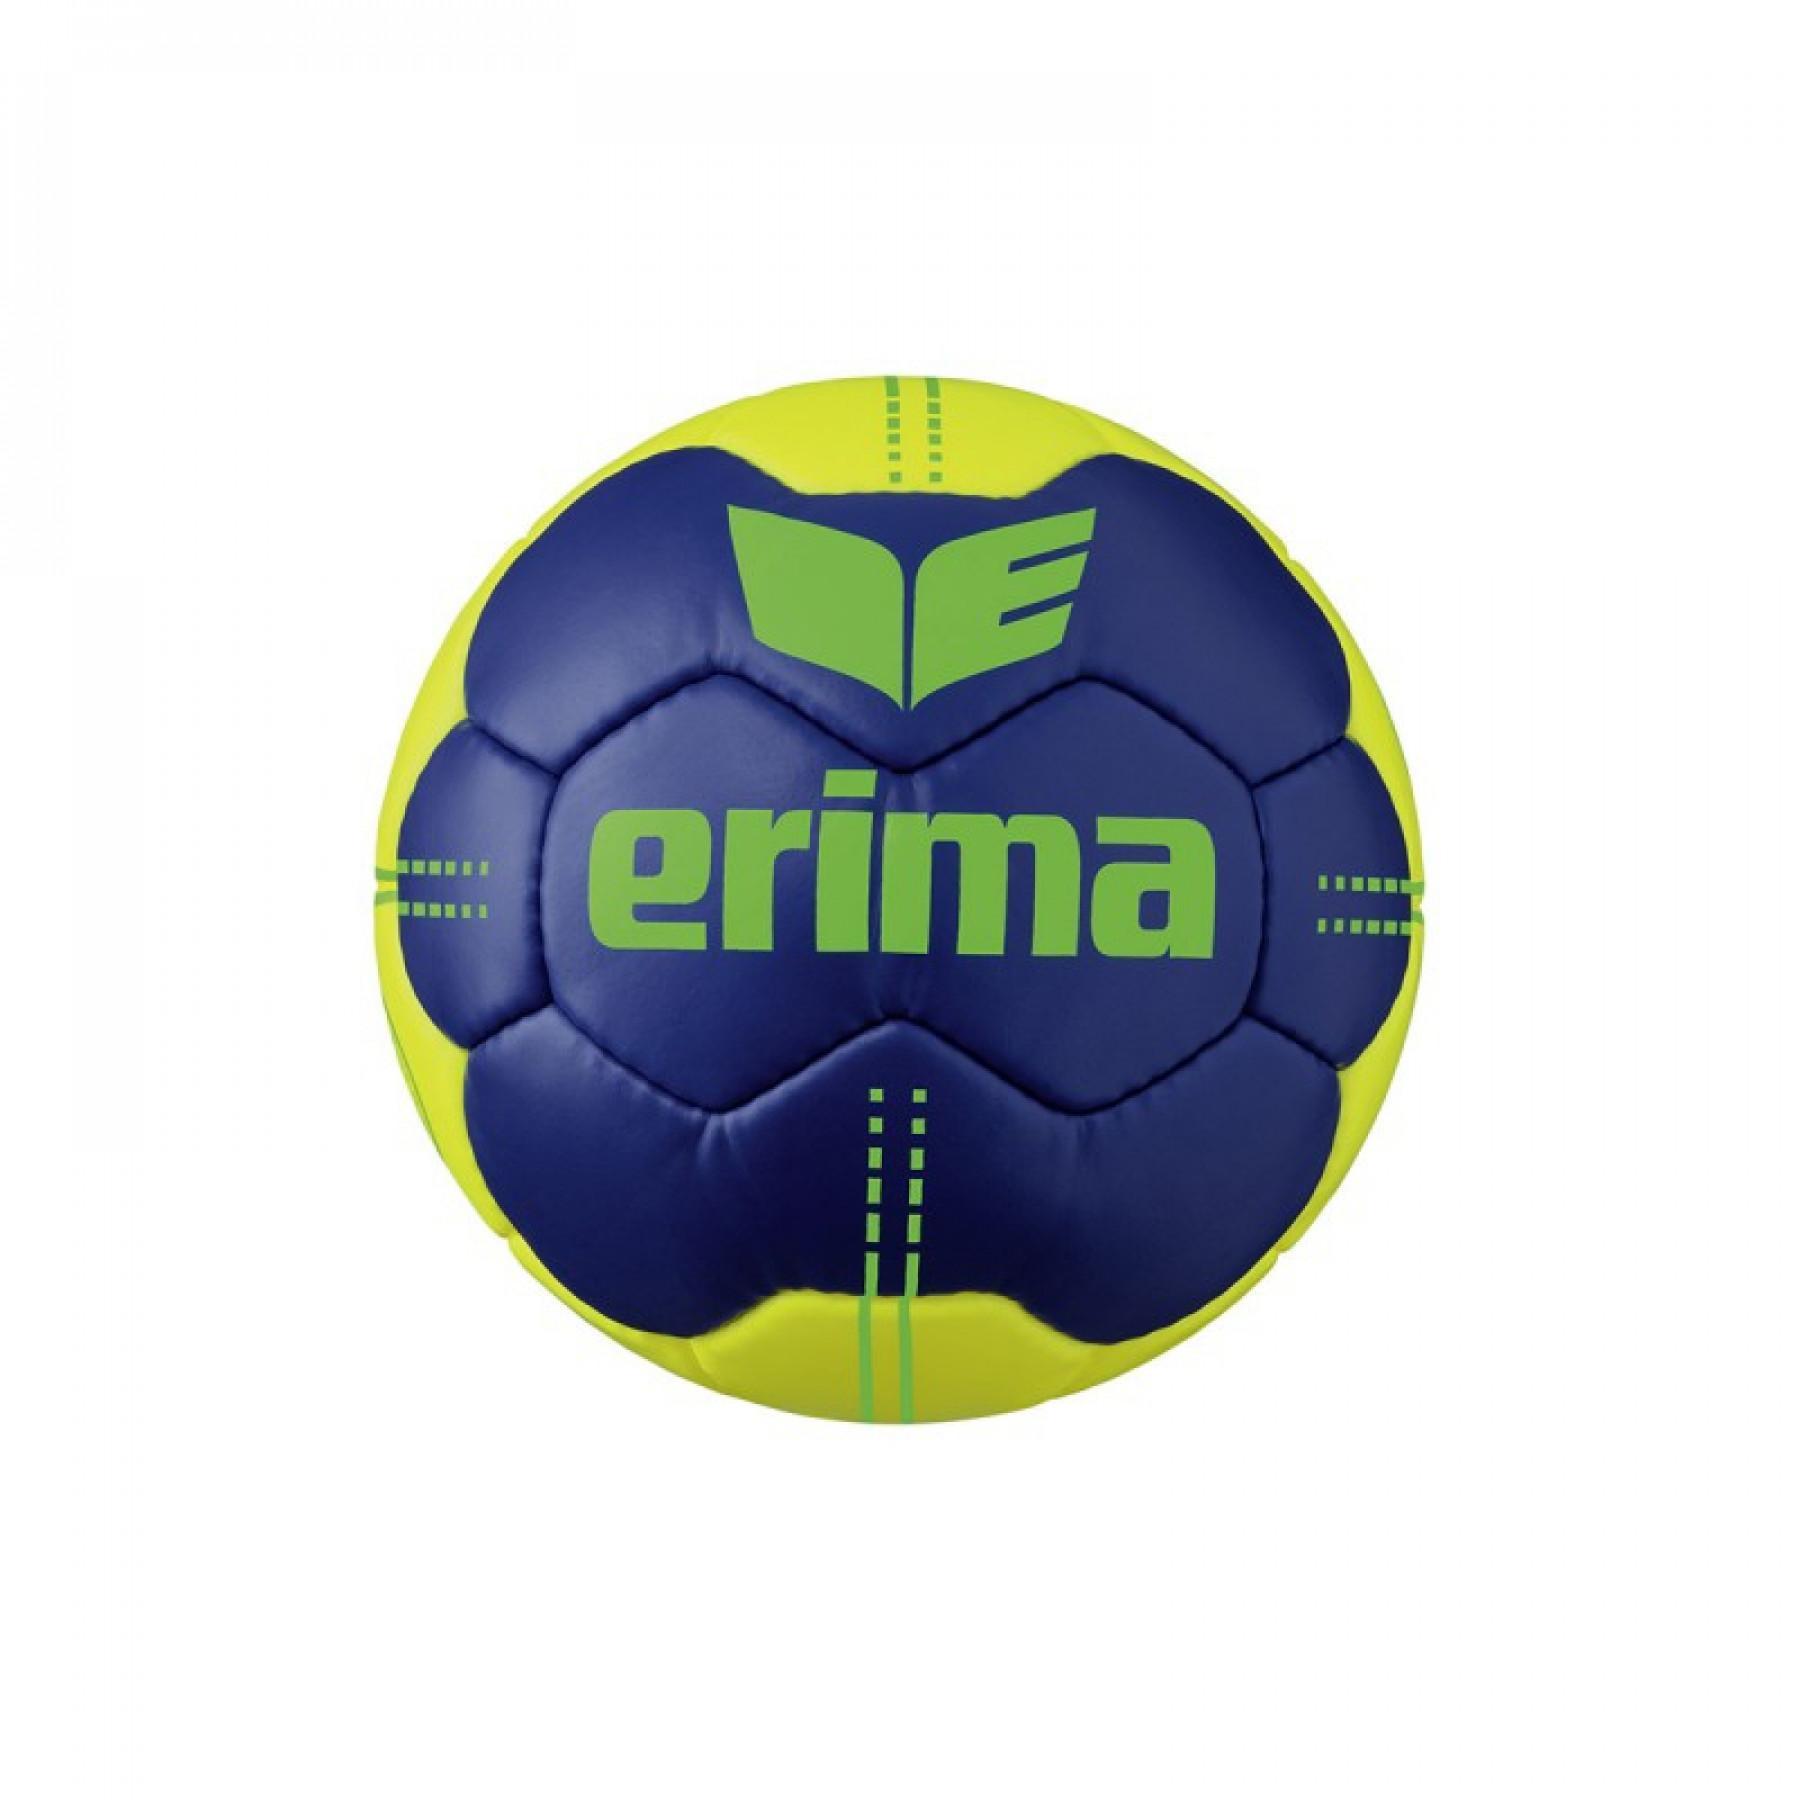 Pack of 10 balloons Erima Pure Grip N° 4